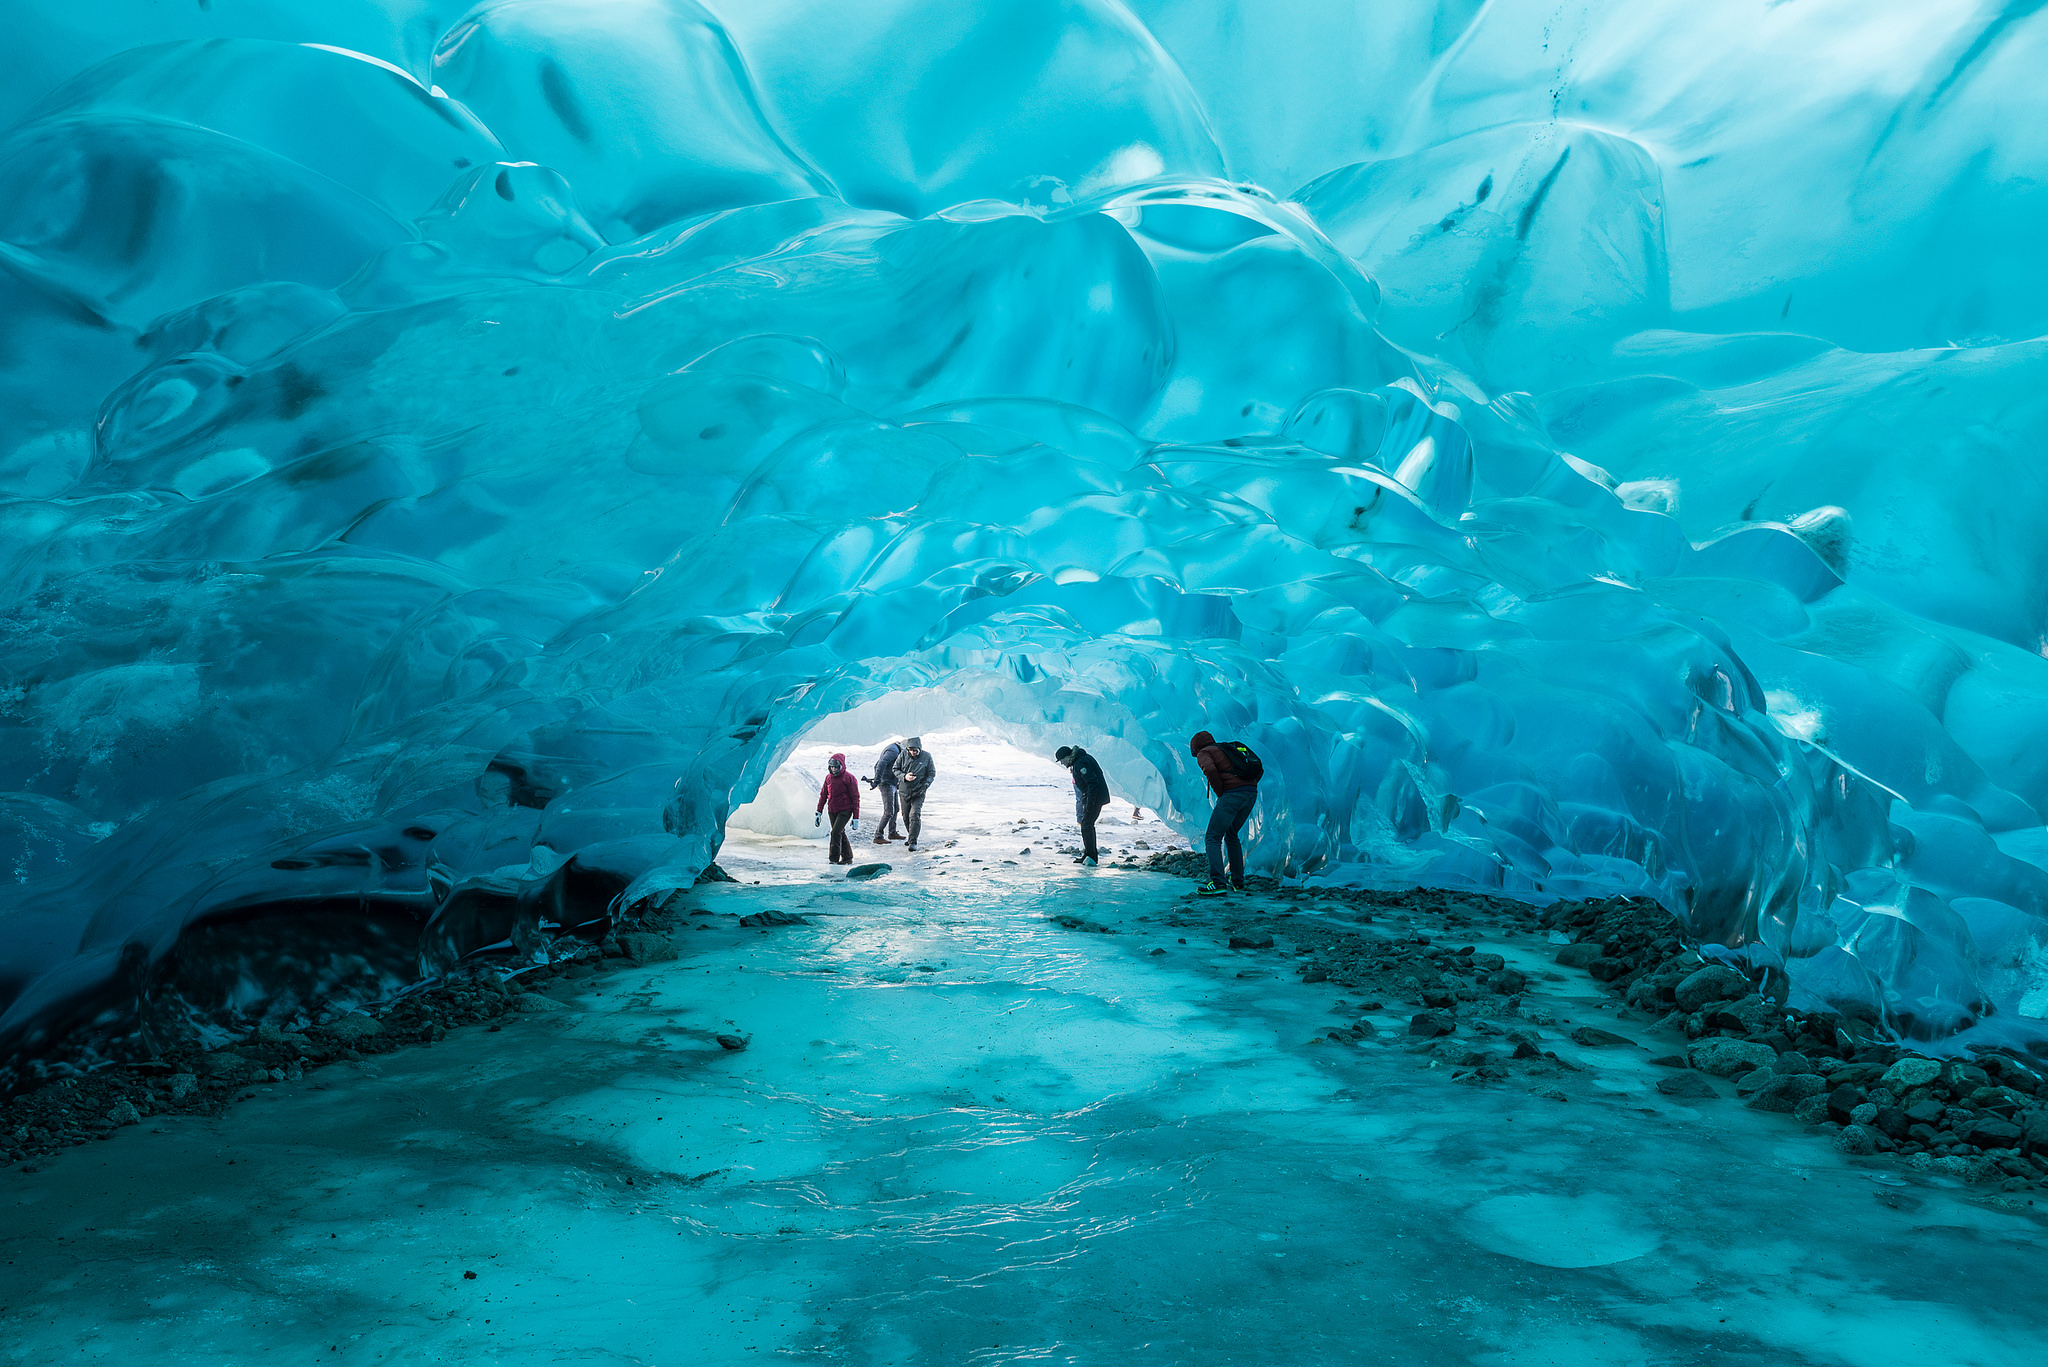 Little Known Caves In Alaska You Should Visit At Least Once